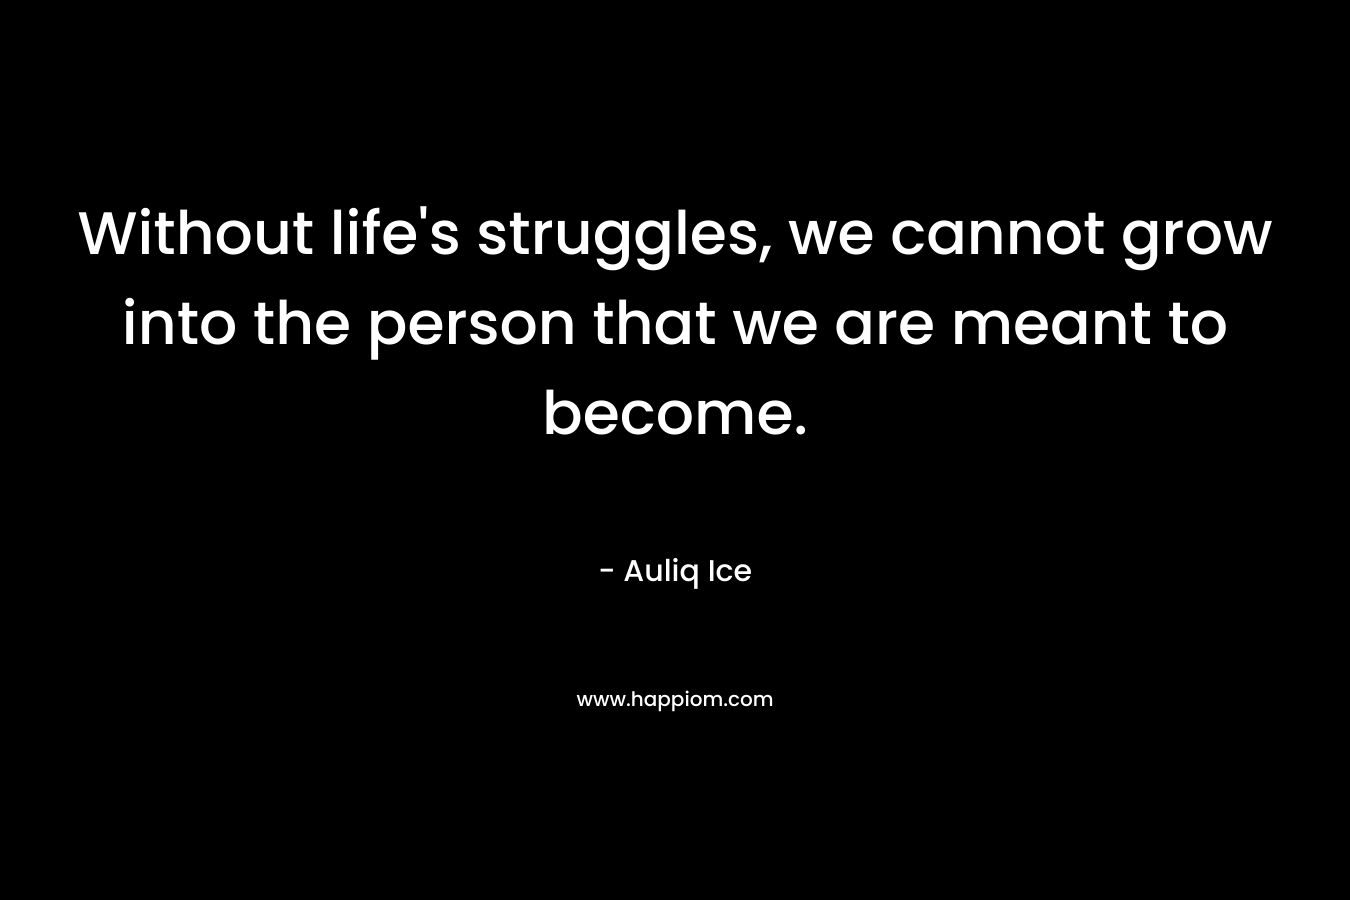 Without life's struggles, we cannot grow into the person that we are meant to become.